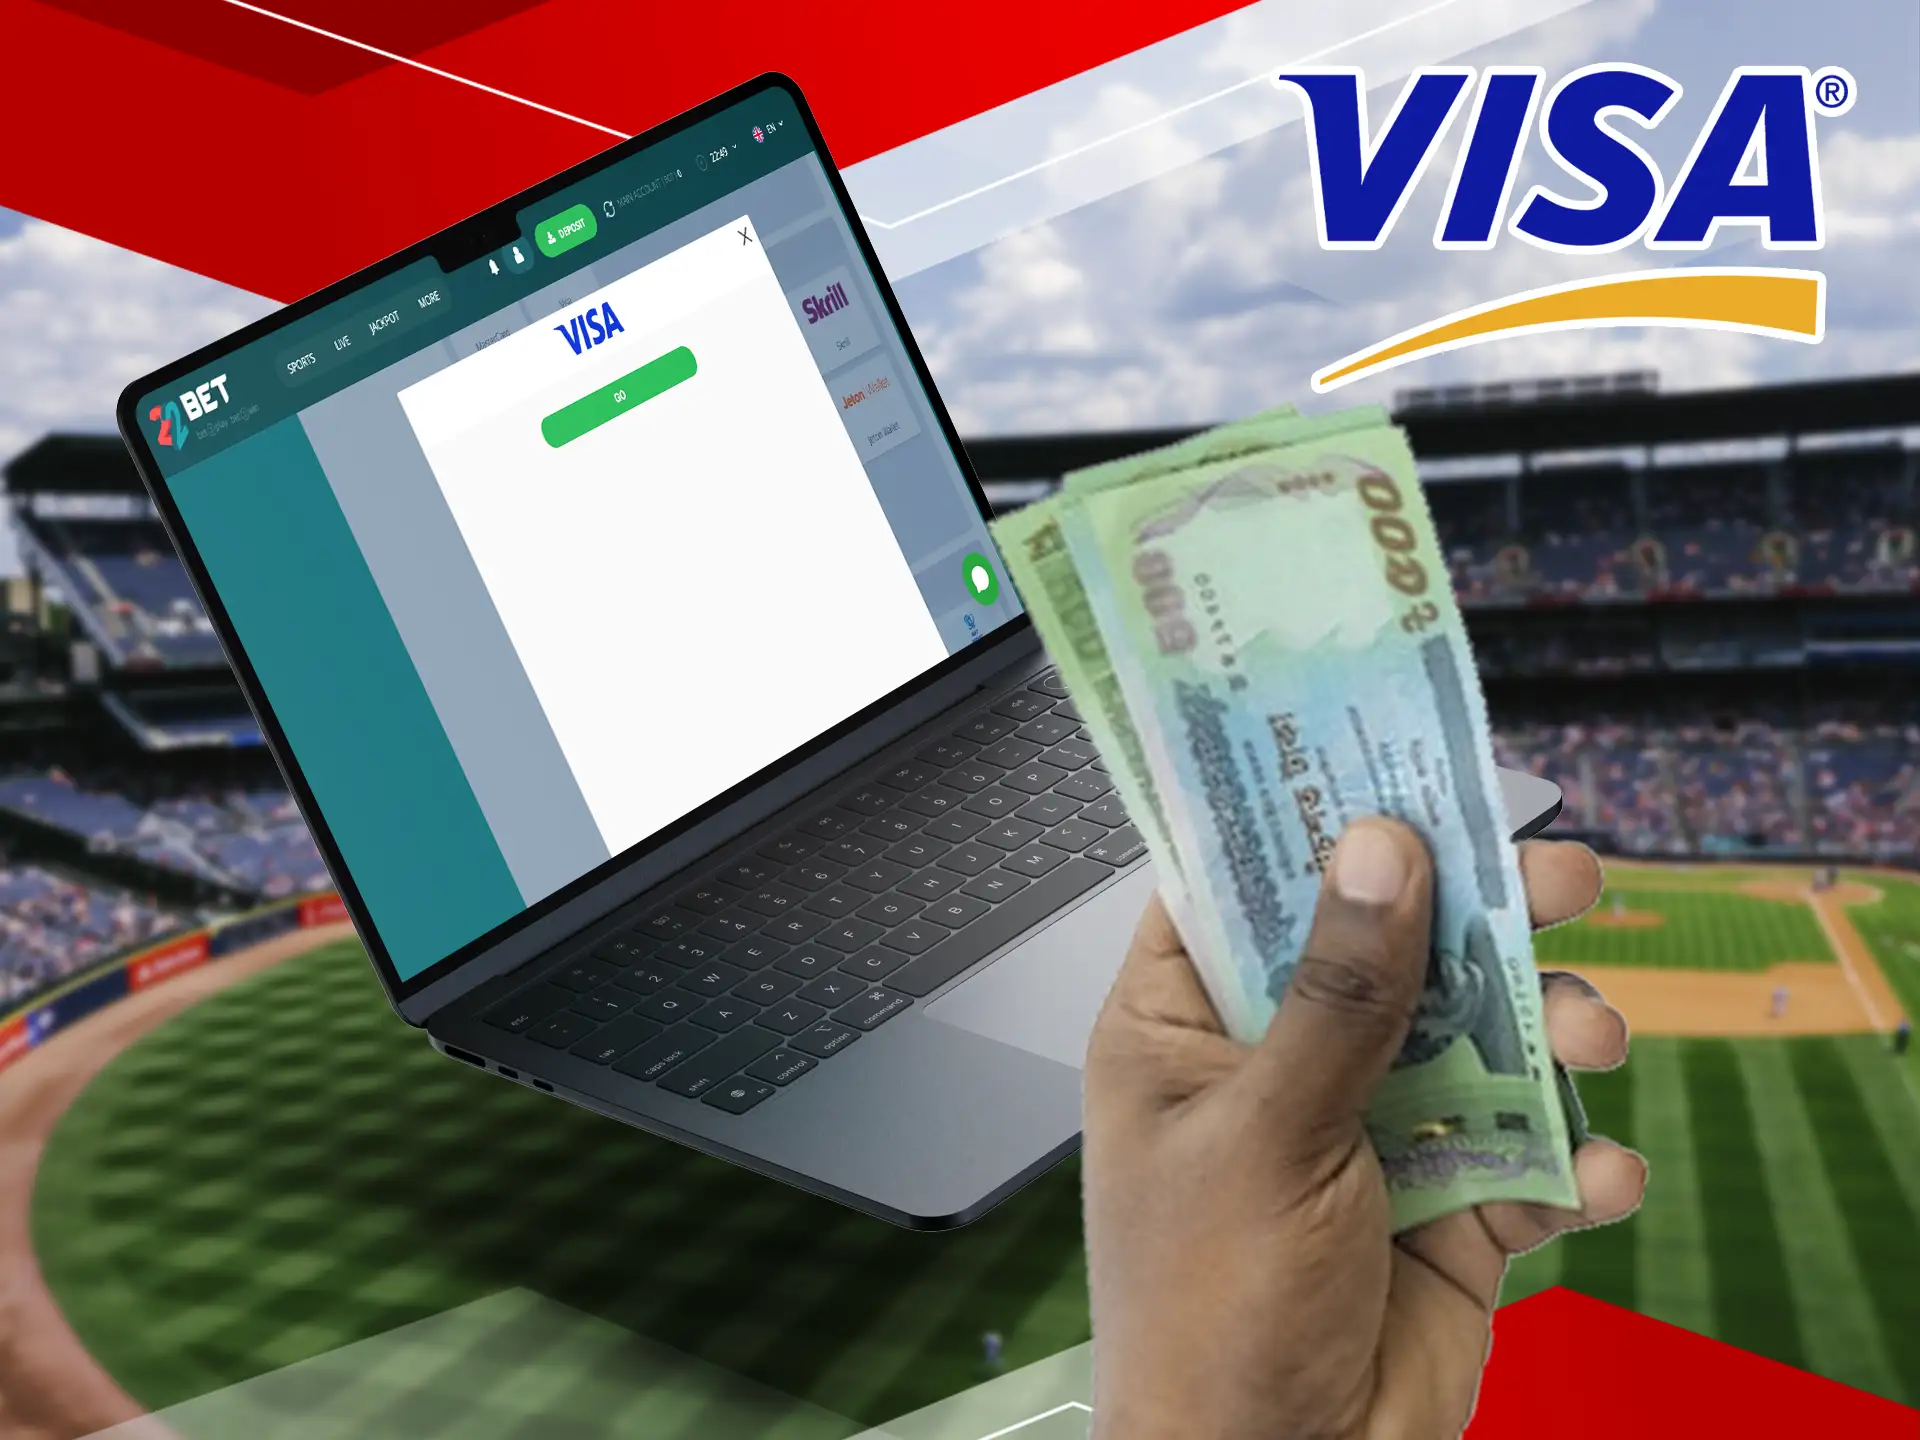 Having a Visa card in Bangladesh ensures that you get a risk-free experience.